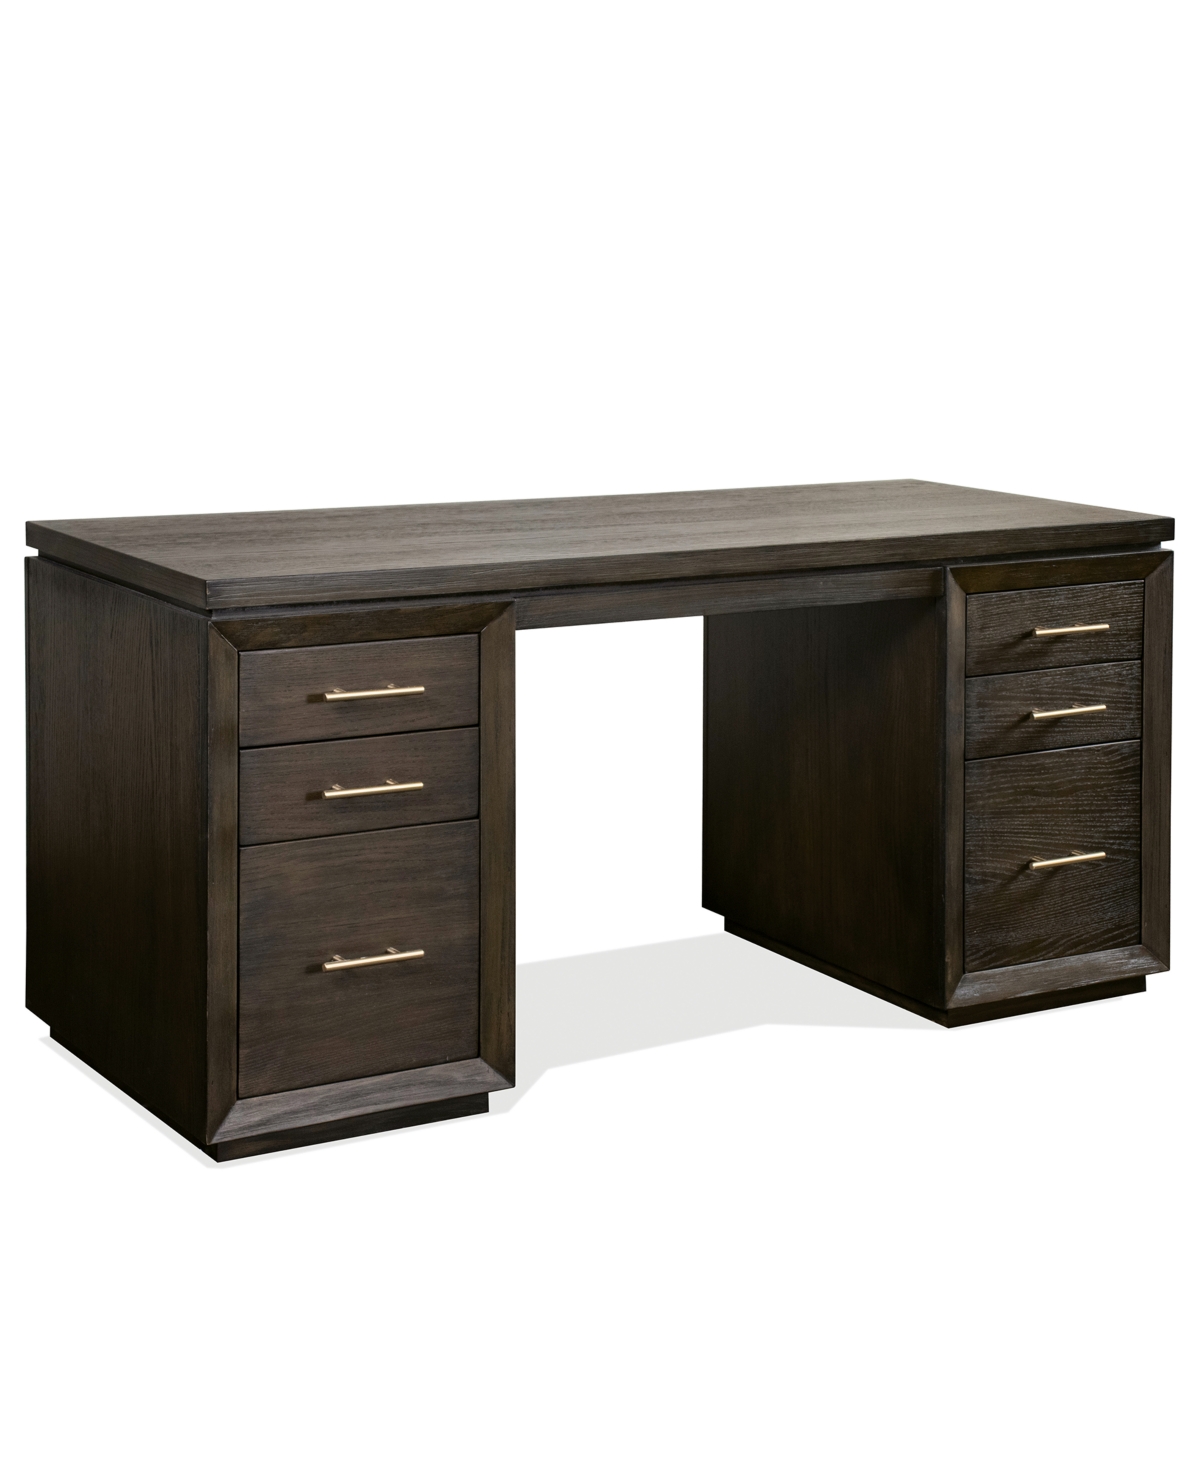 Furniture Prelude 62" Wood Dovetail Joinery Executive Desk In Umber